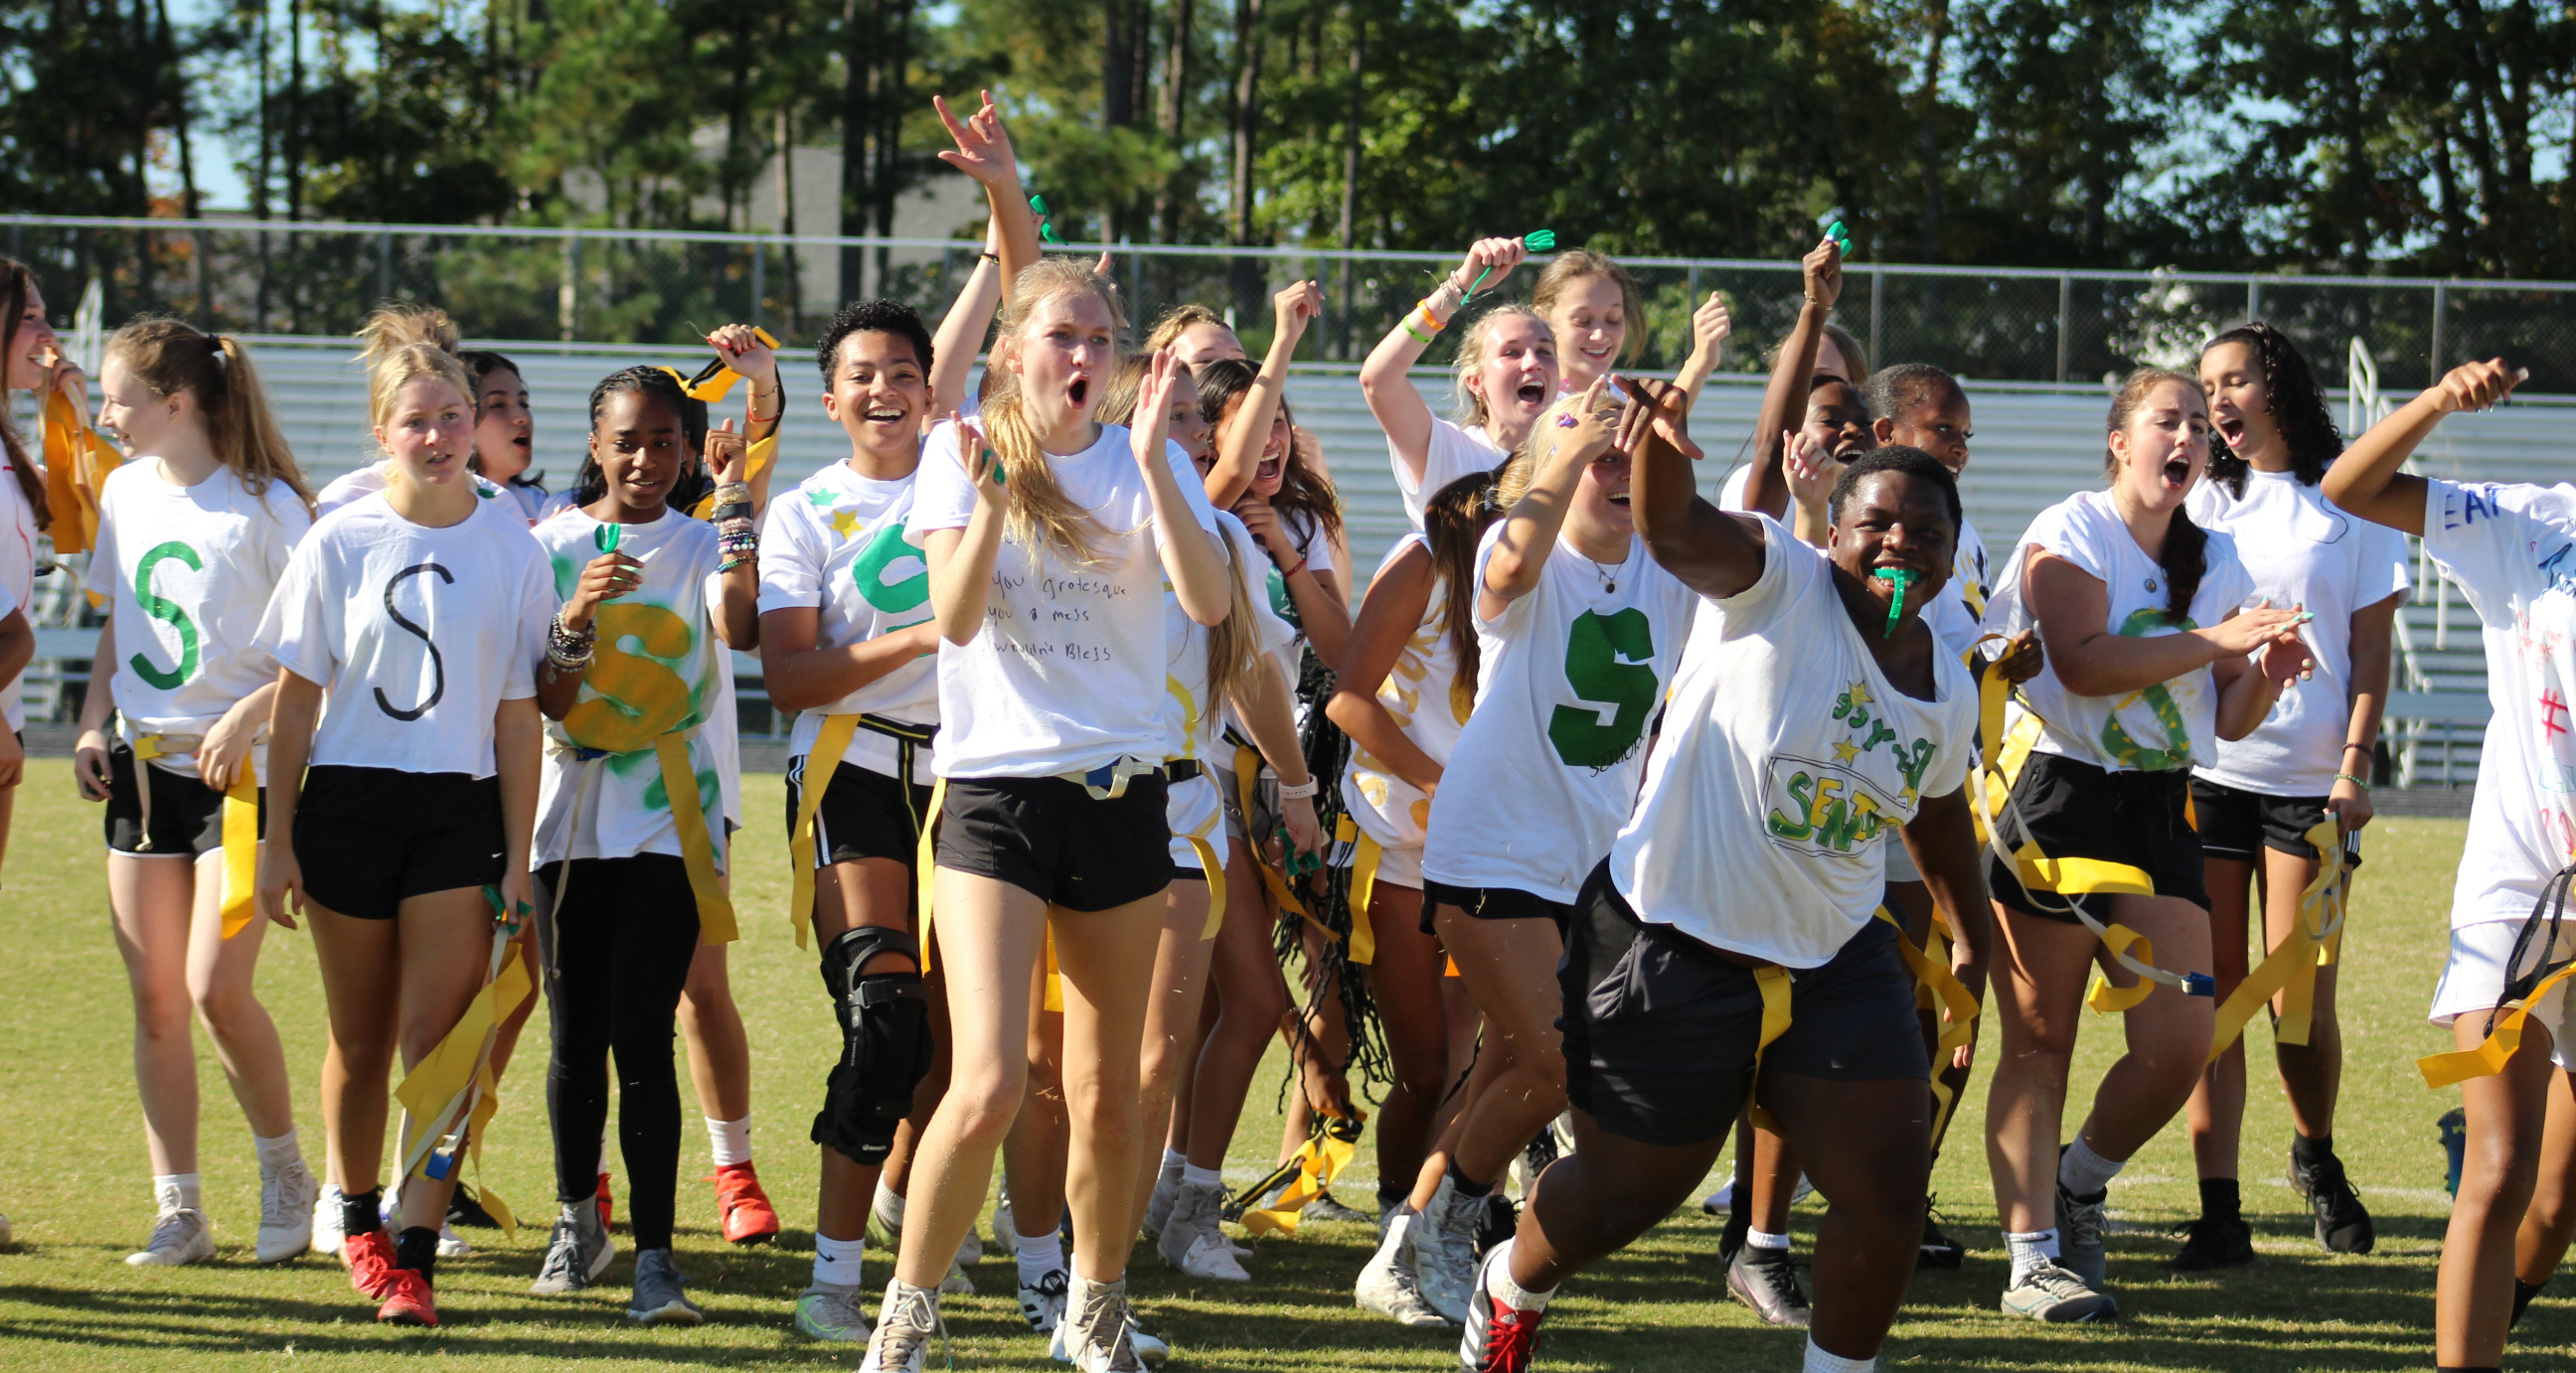 Girls celebrating on the field after winning a game of flag football